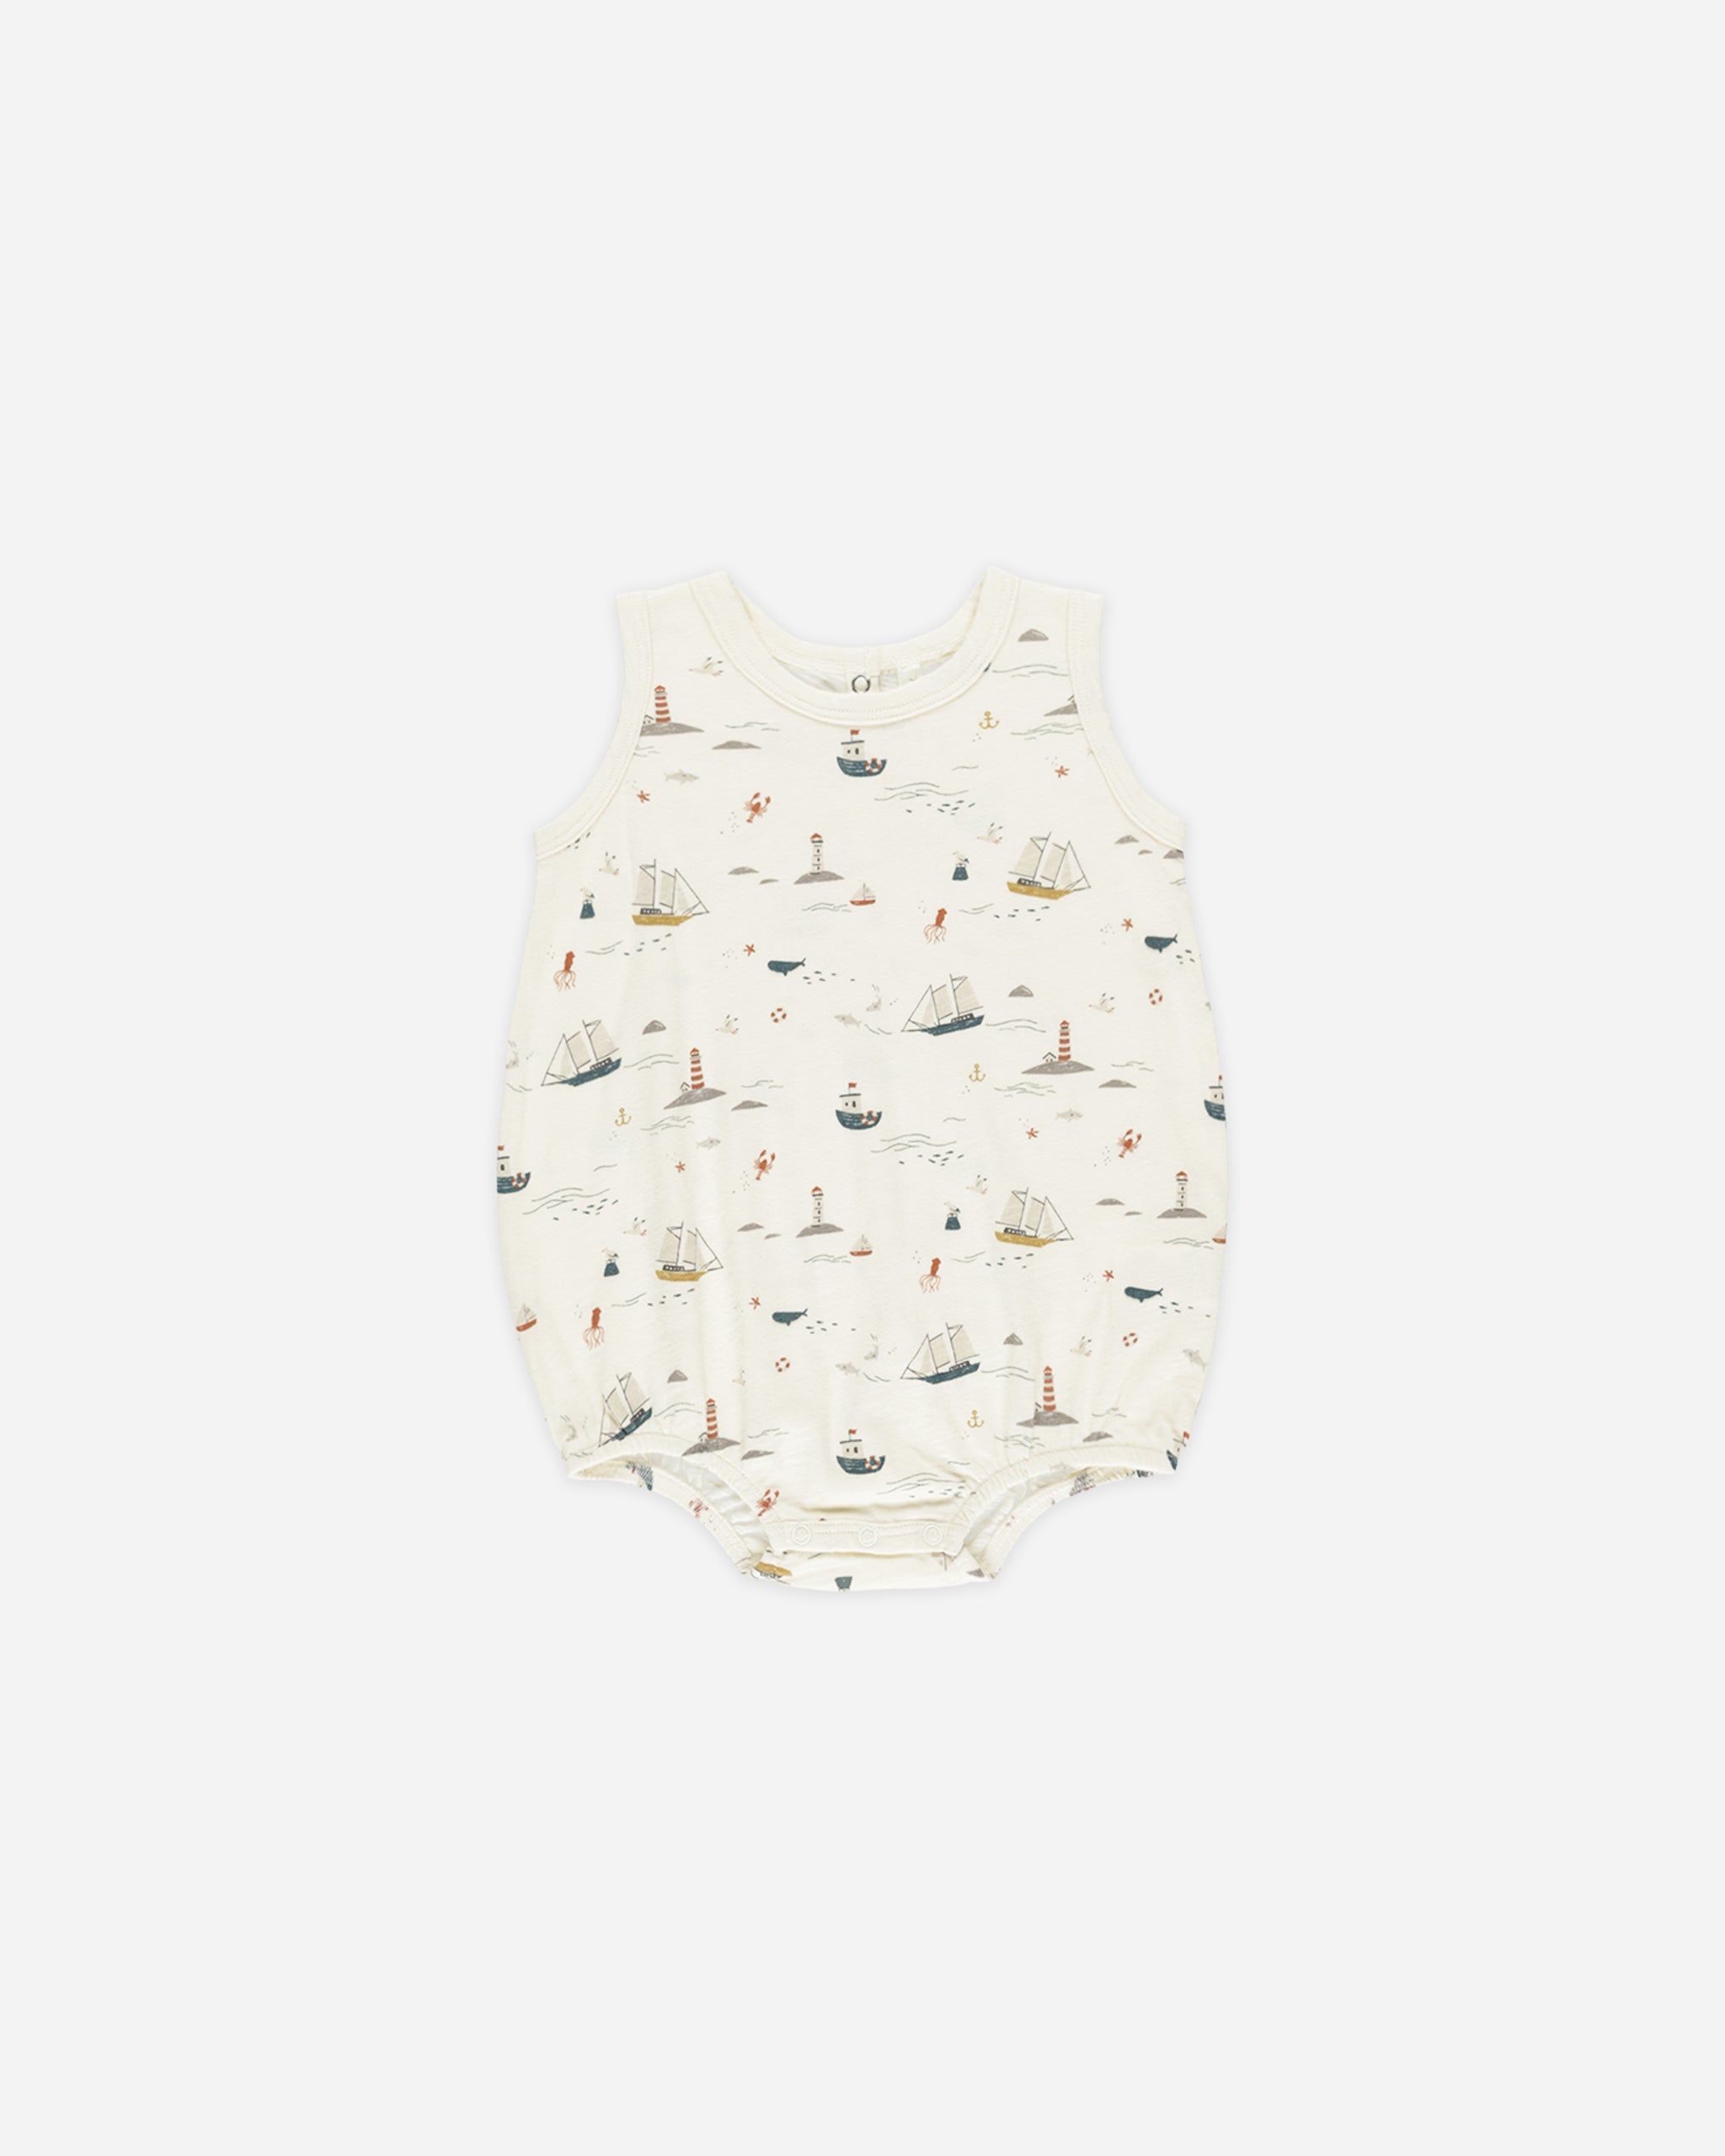 Bubble Onesie || Nautical - Rylee + Cru | Kids Clothes | Trendy Baby Clothes | Modern Infant Outfits |